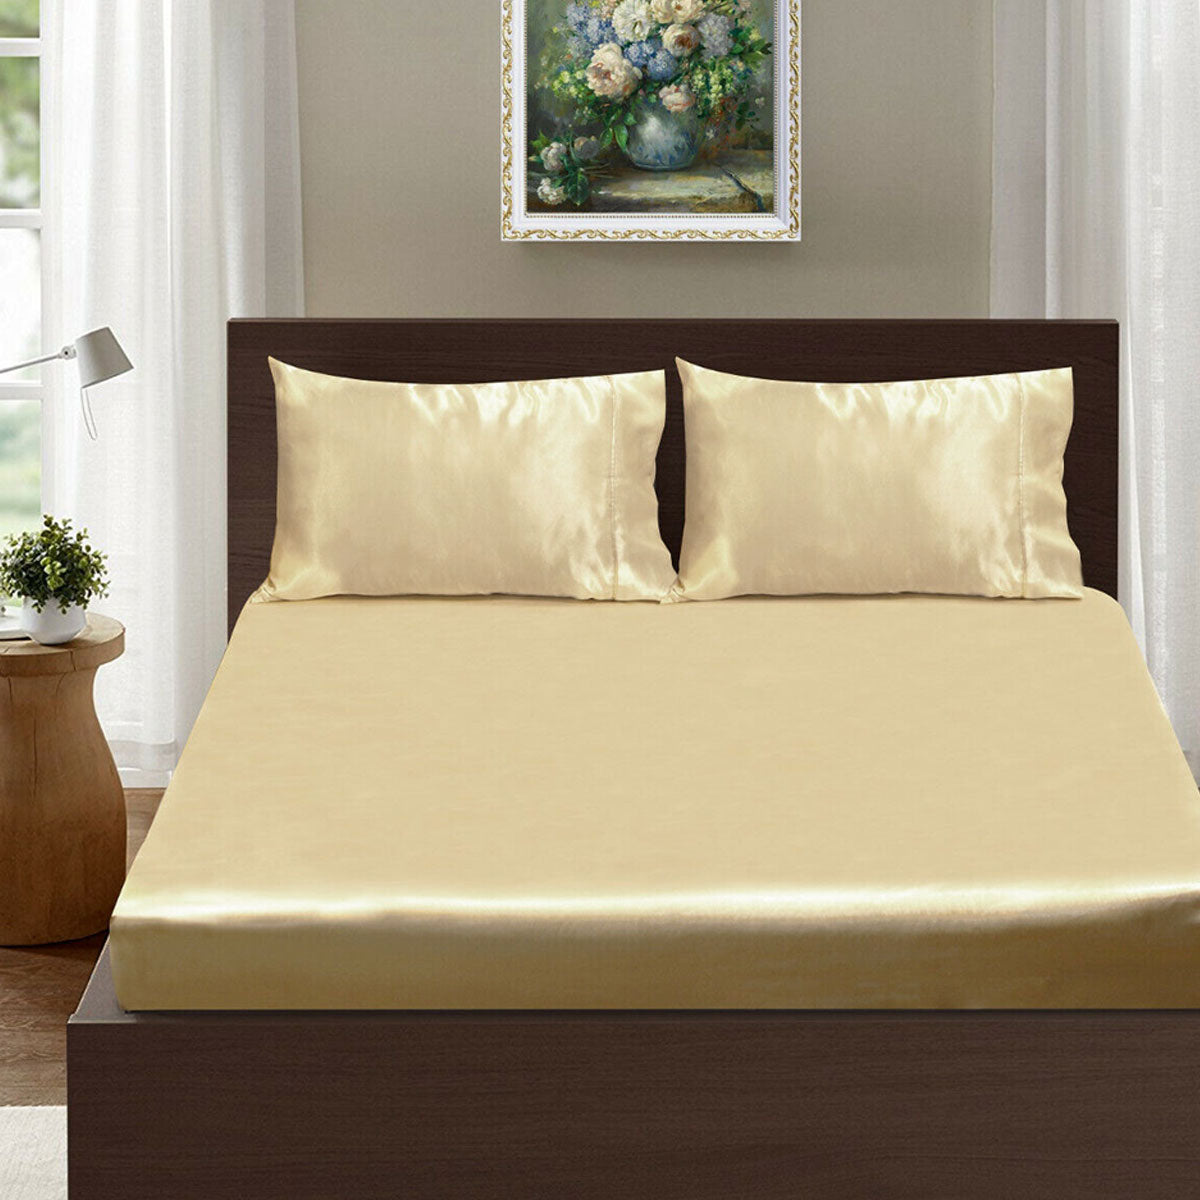 Ramesses Casablanca Satin Fitted Sheet Combo Set Champagne King